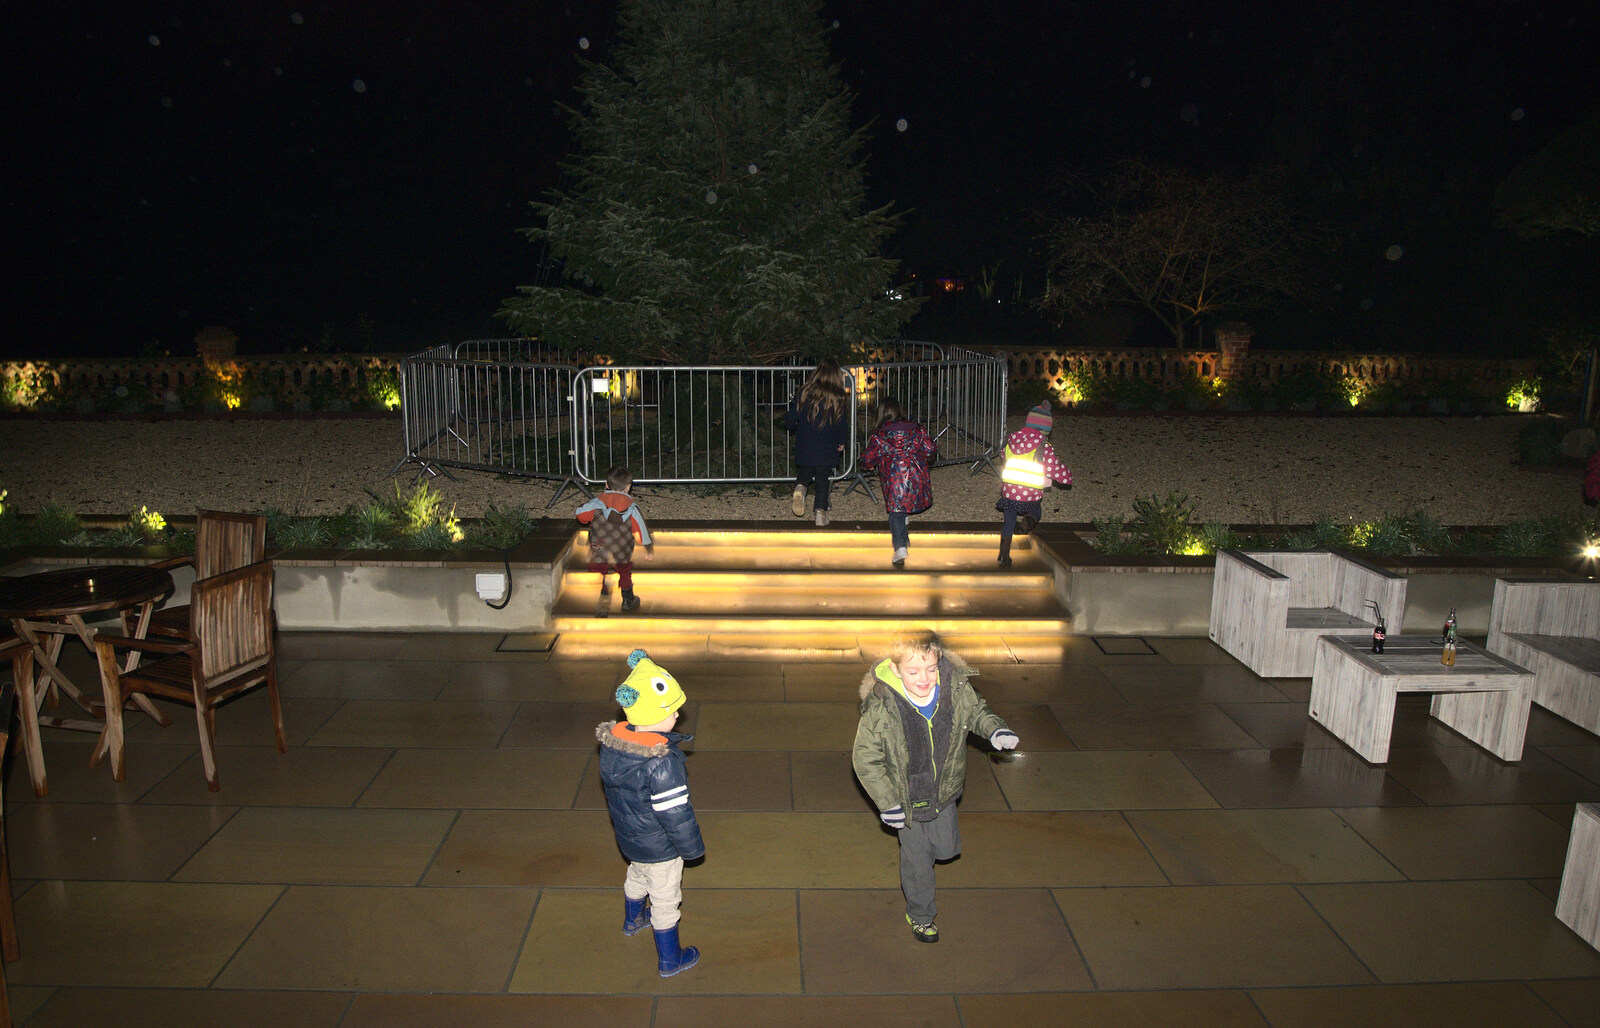 Harry and Fred run around from Rick Wakeman, Ian Lavender and the Christmas lights, The Oaksmere, Suffolk - 4th December 2014